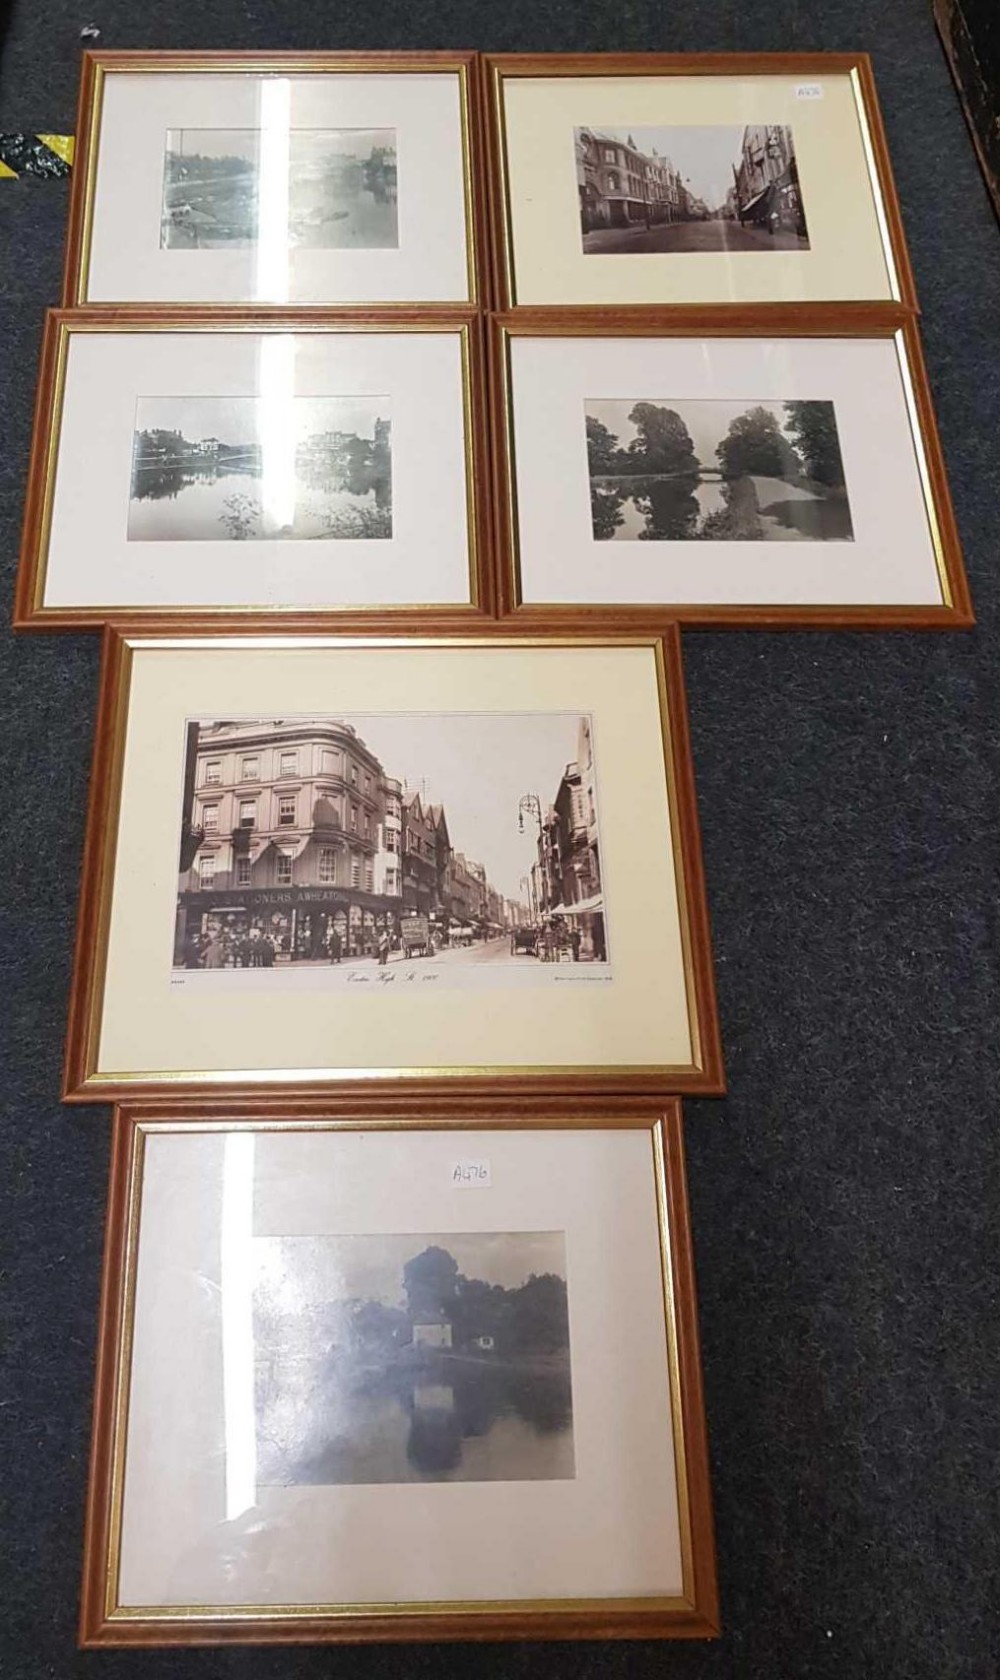 A SIX FRAME GLAZED PICTURE, 2 OF EXETER AND 4 RIVER SCENES